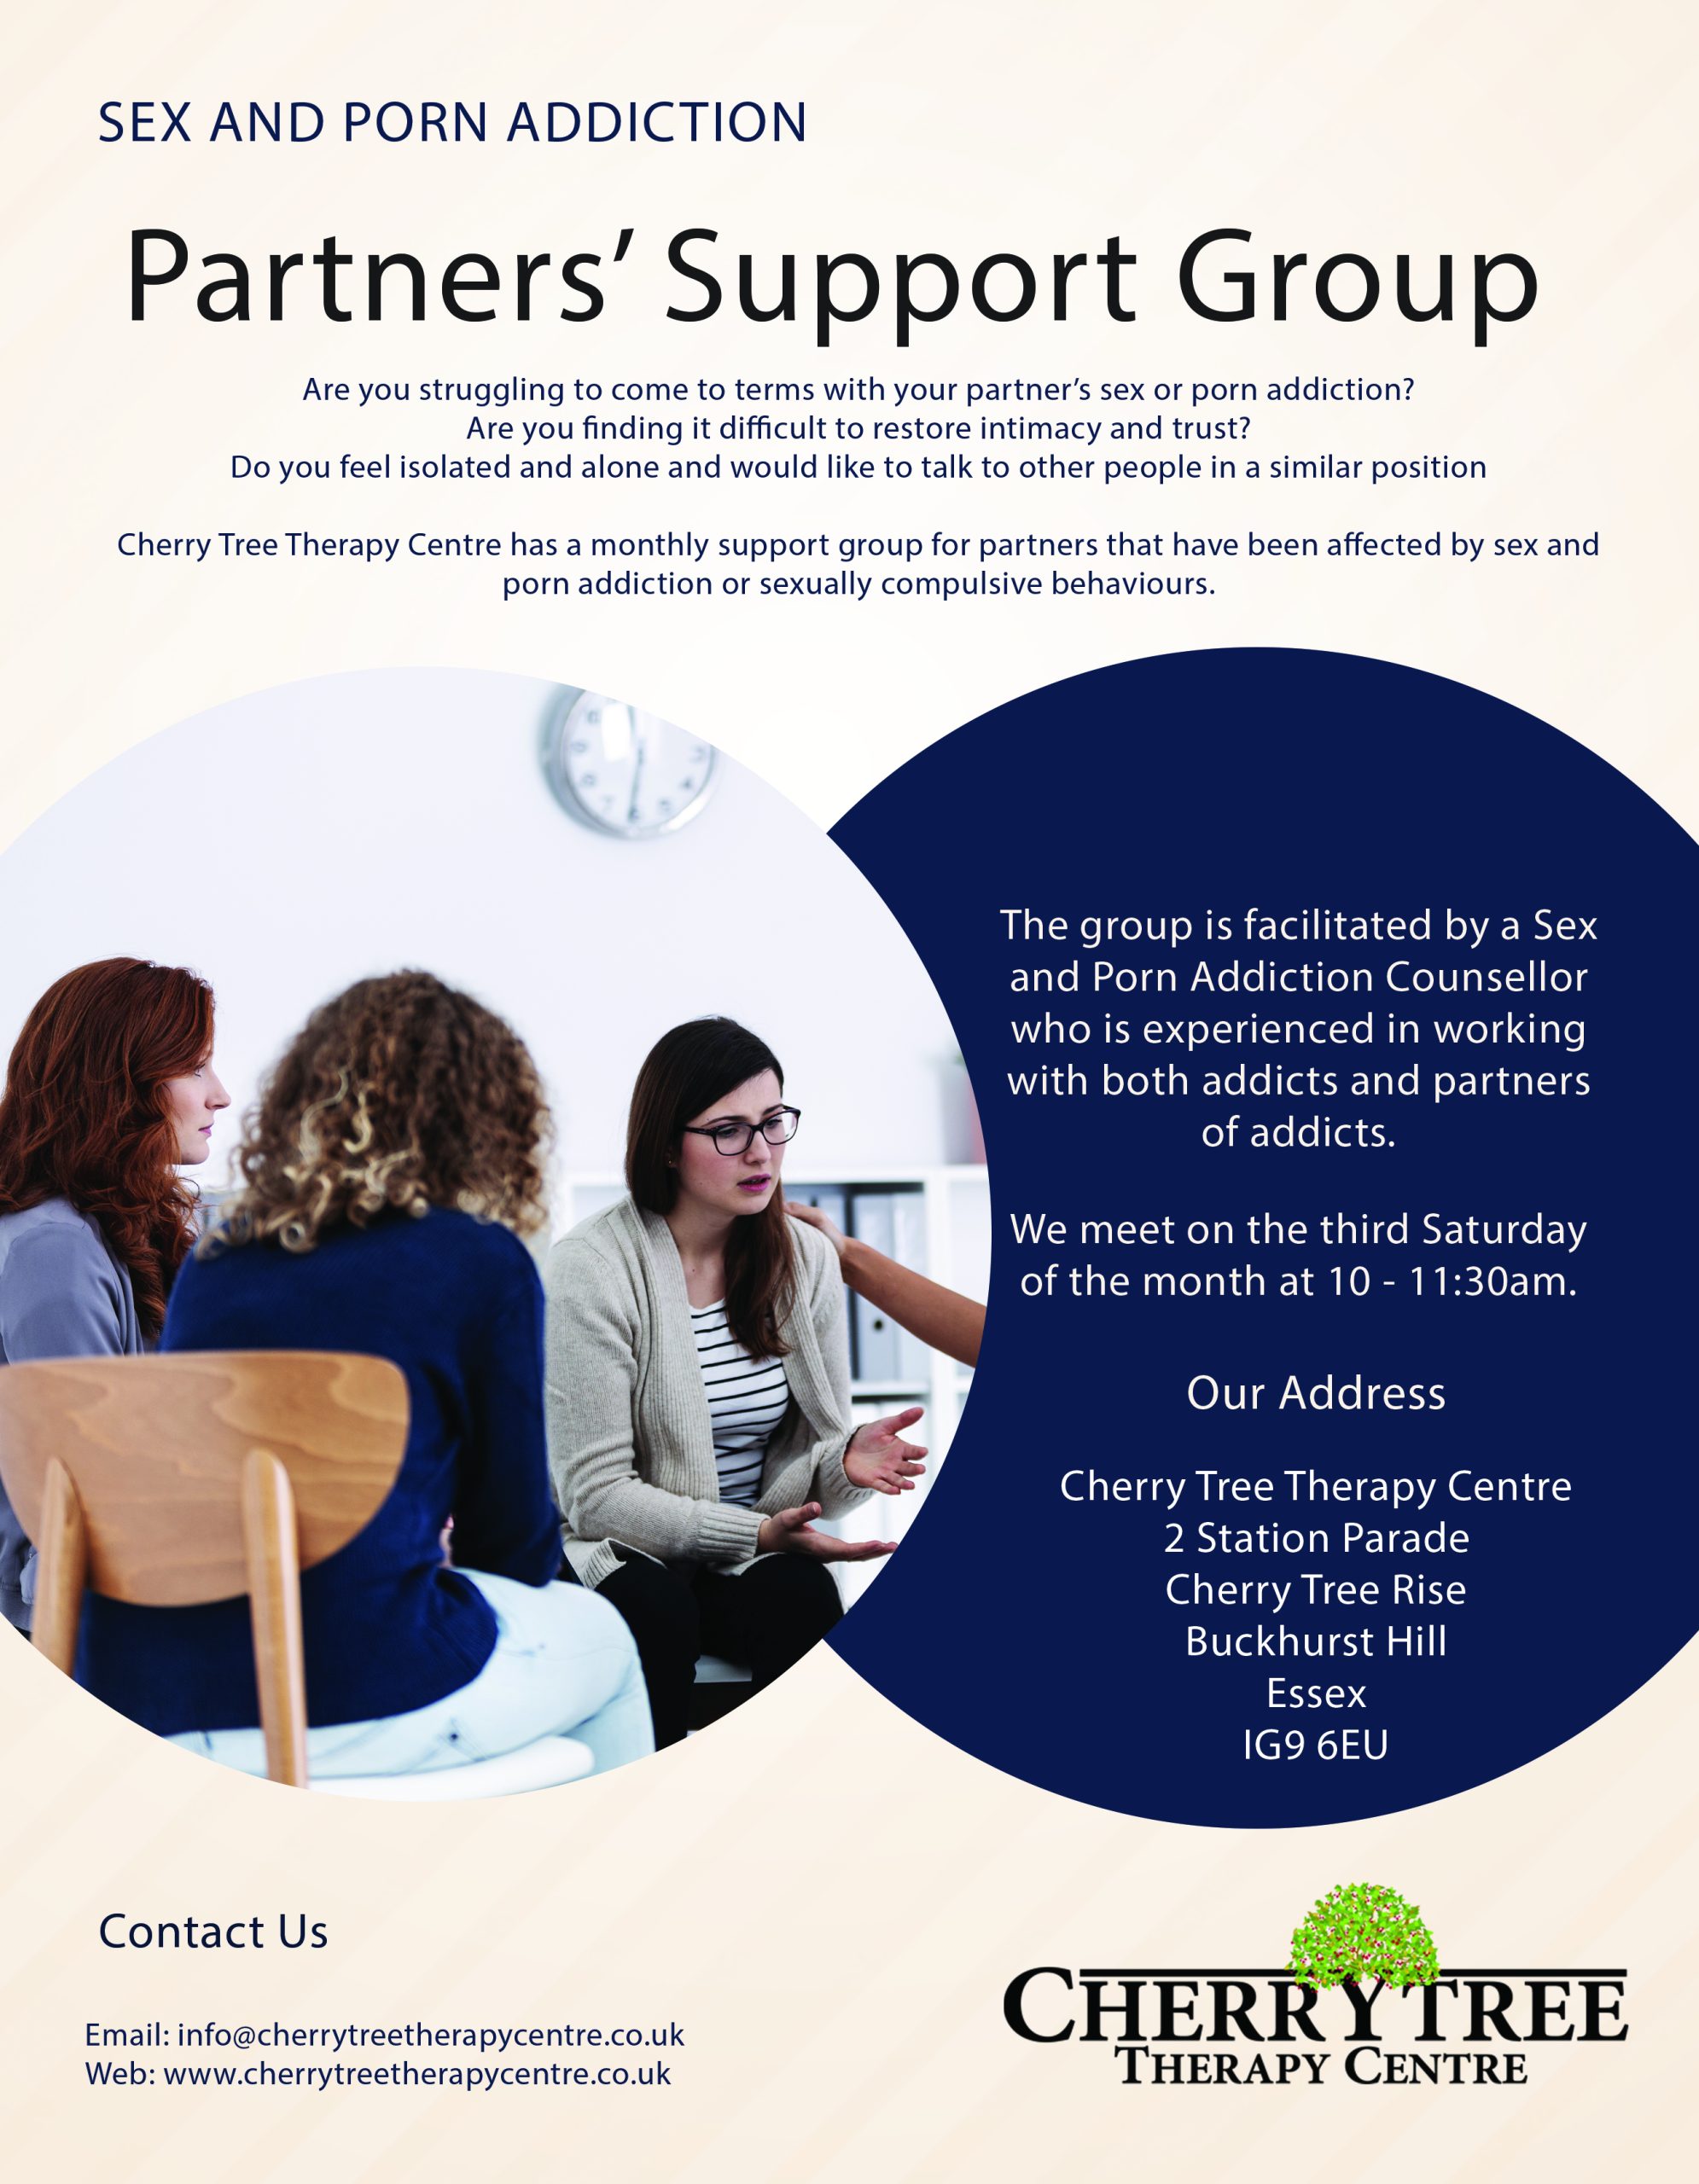 Sex Addiction Partner's Support Group